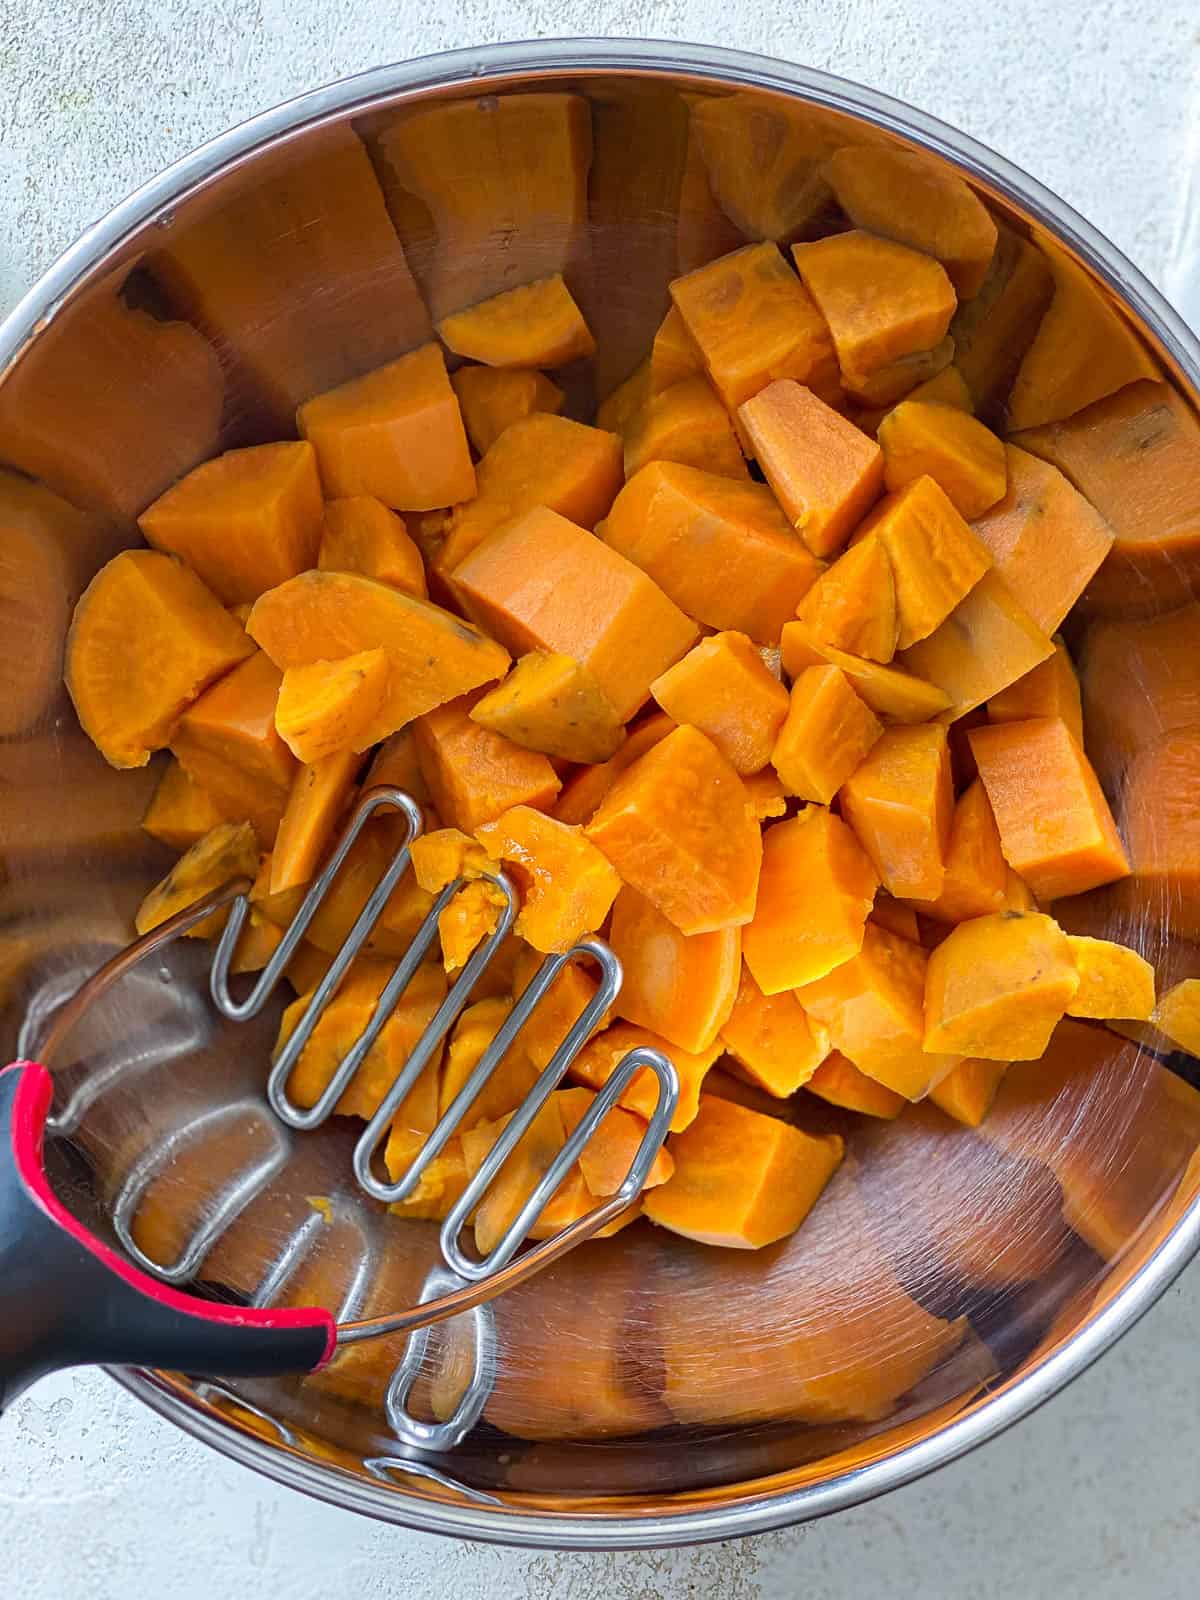 Cooked sweet potatoes in a silver bowl with a potato masher.